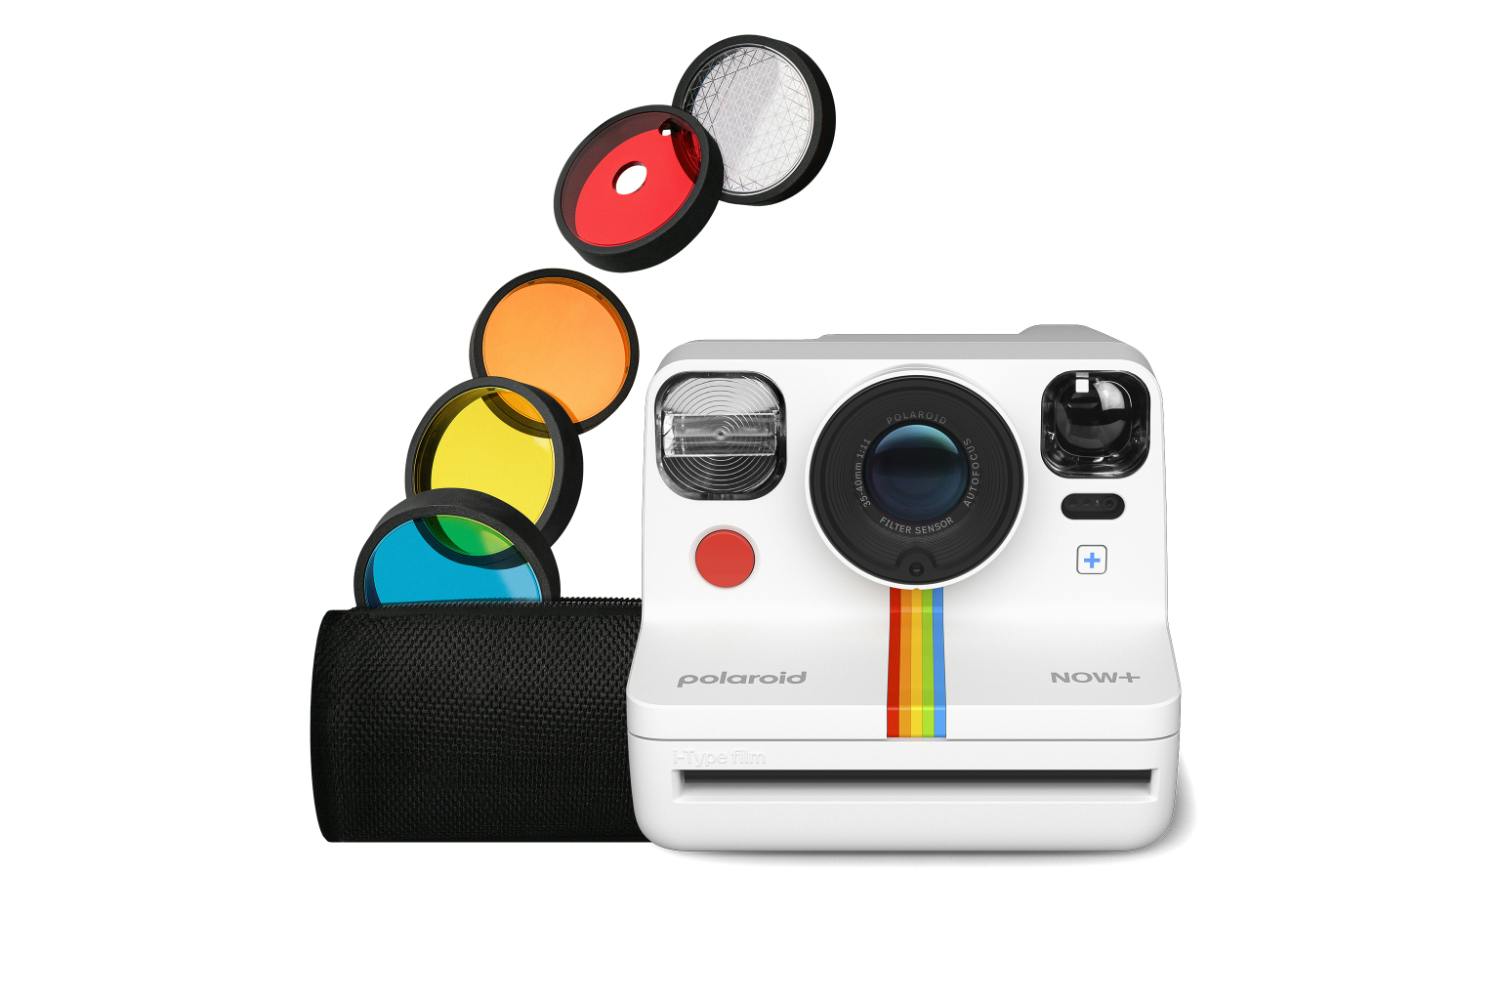 Polaroid Now Bundle with White Camera and Red Travel Pouch 